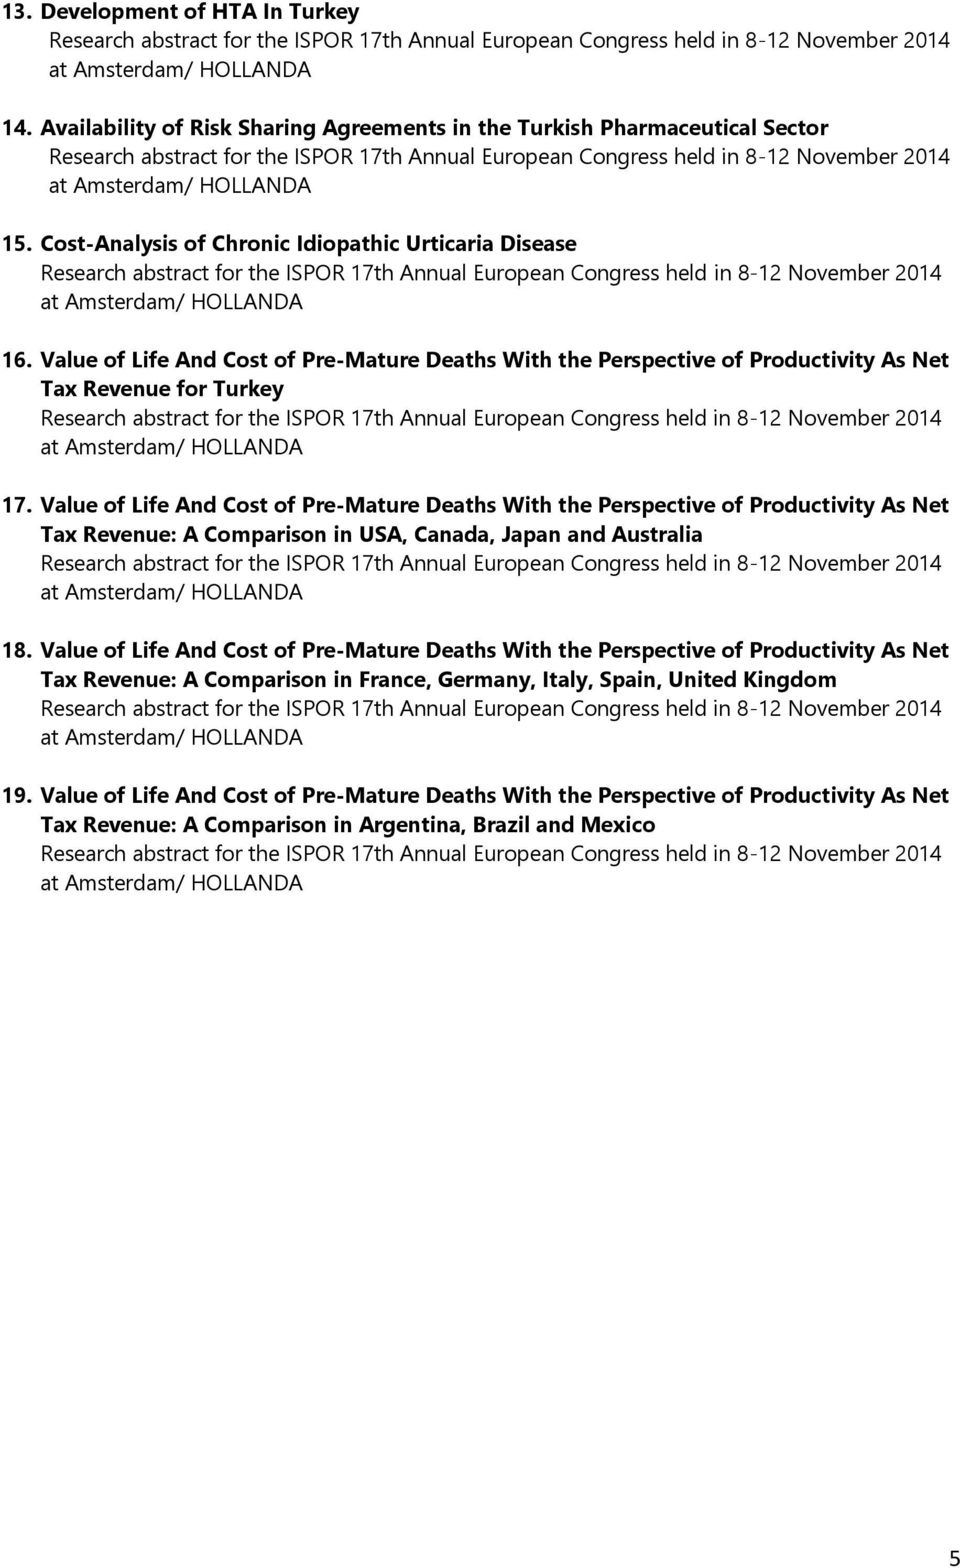 Value of Life And Cost of Pre-Mature Deaths With the Perspective of Productivity As Net Tax Revenue: A Comparison in USA, Canada, Japan and Australia 18.